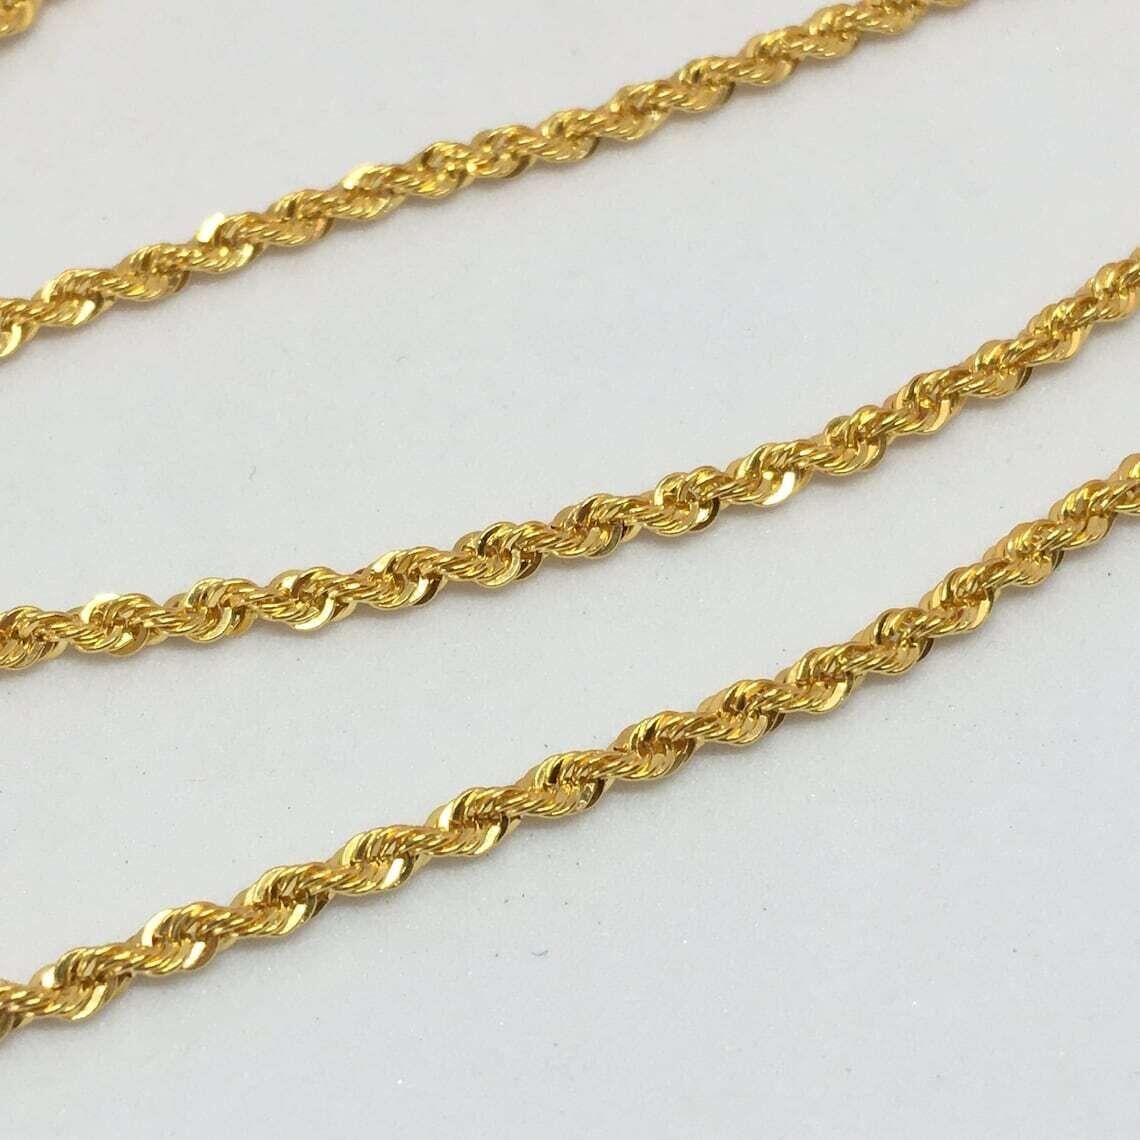 18K Solid Gold Rope Chain Necklace Men Women - Genuine 18k Gold - All Sizes